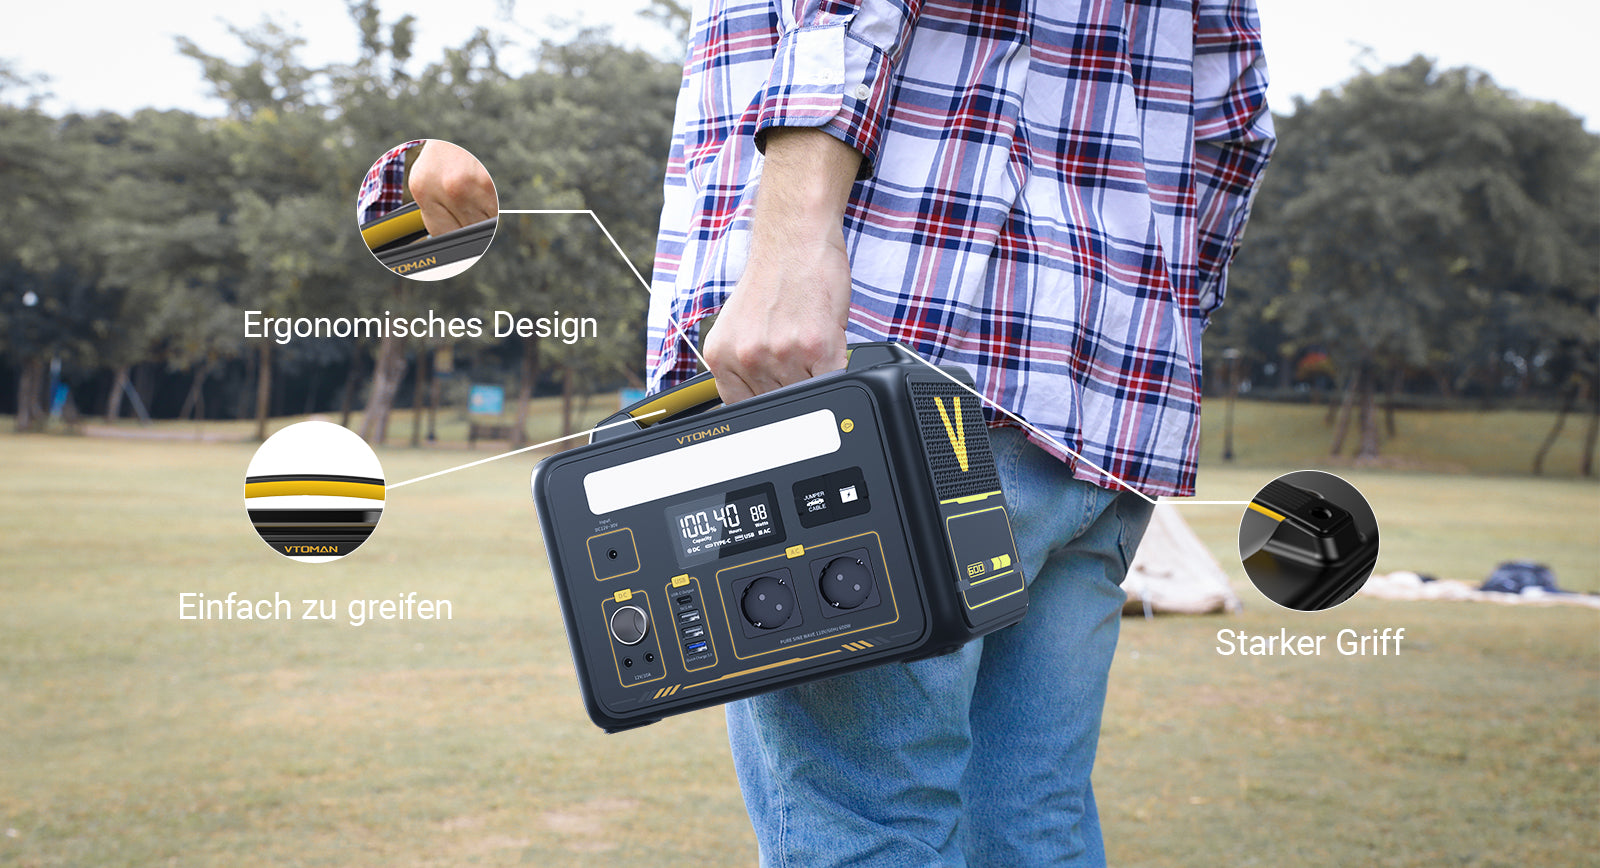 VTOMAN JUMP 600 is one of the lightest and most portable battery generators